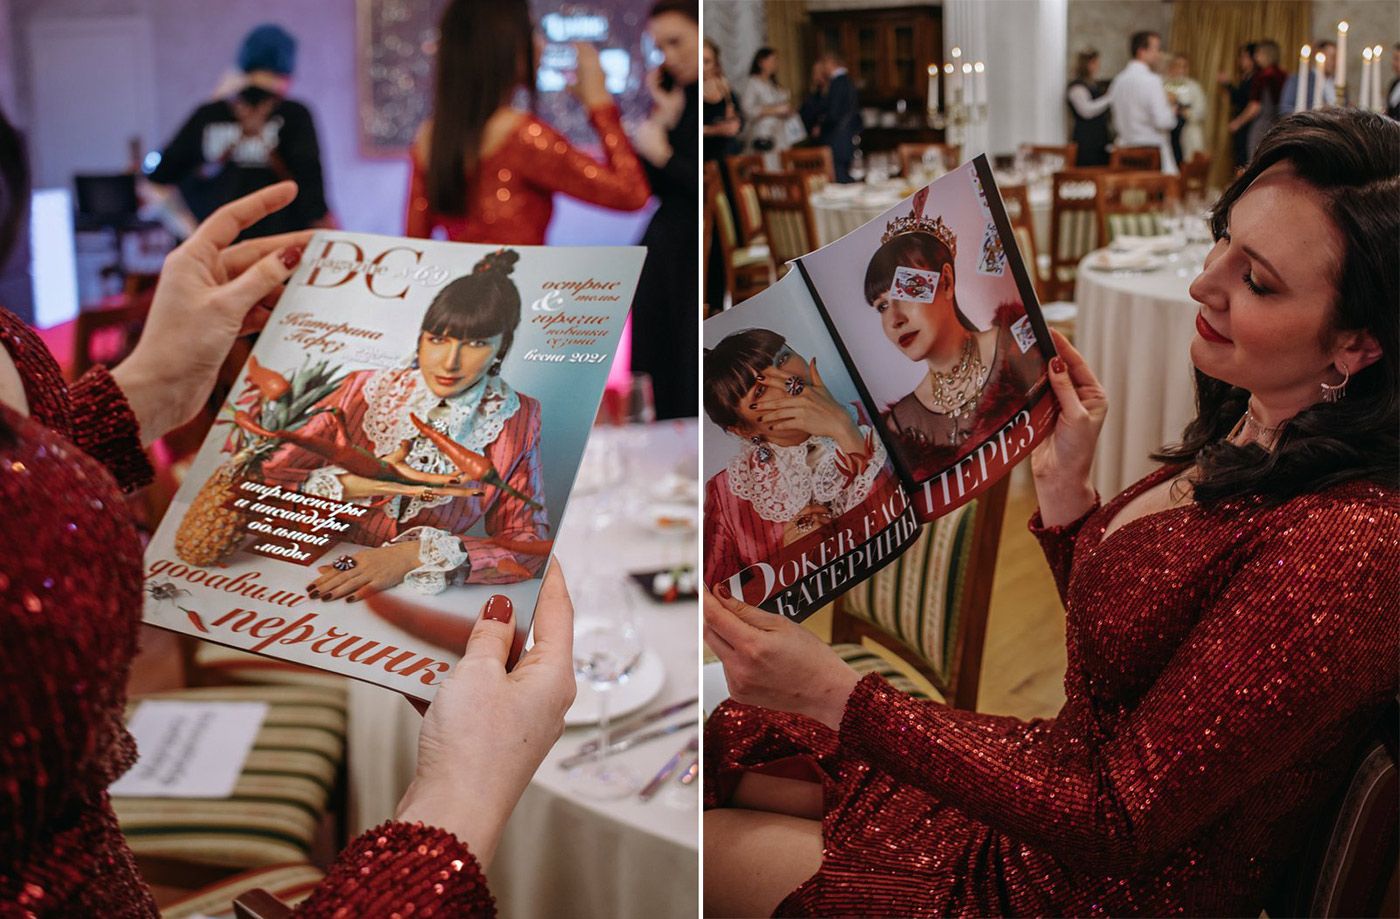 Katerina Perez holds up an issue of DC Magazine that features her photograph on the cover at the DC Awards in St Petersburg